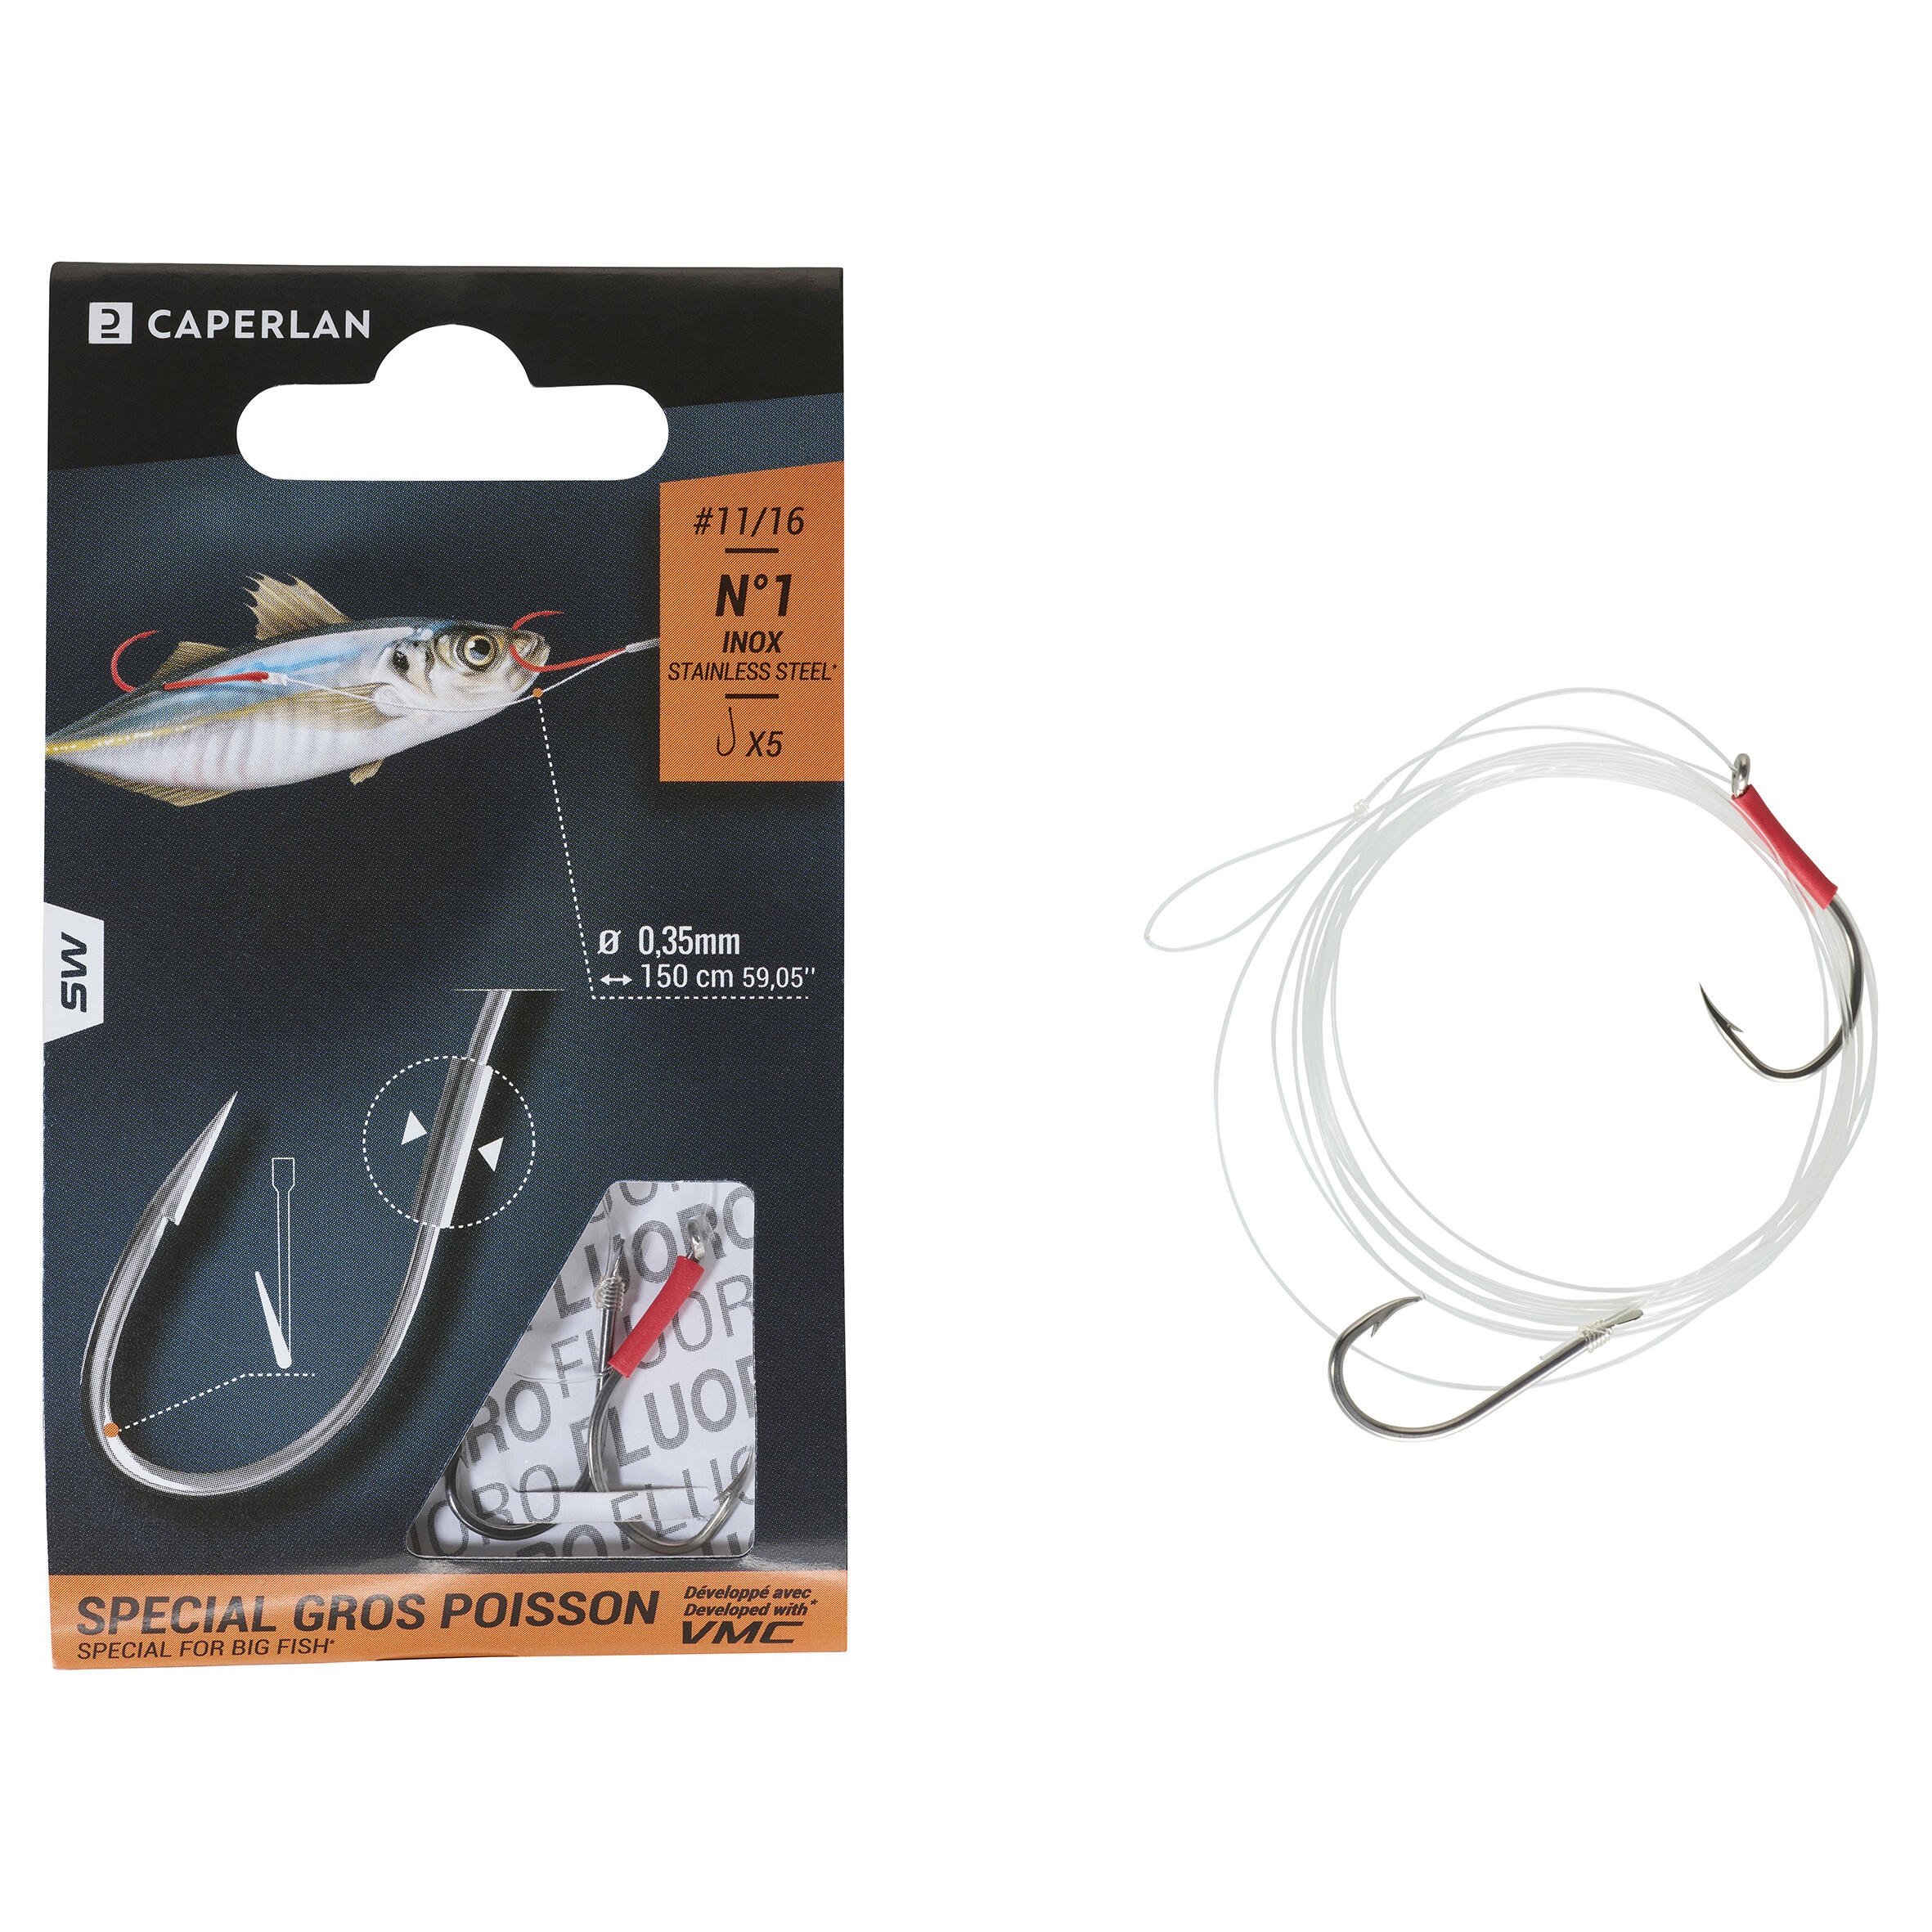 Sea fishing eyed hooks to line SN SPECIAL LARGE FISH 1/3